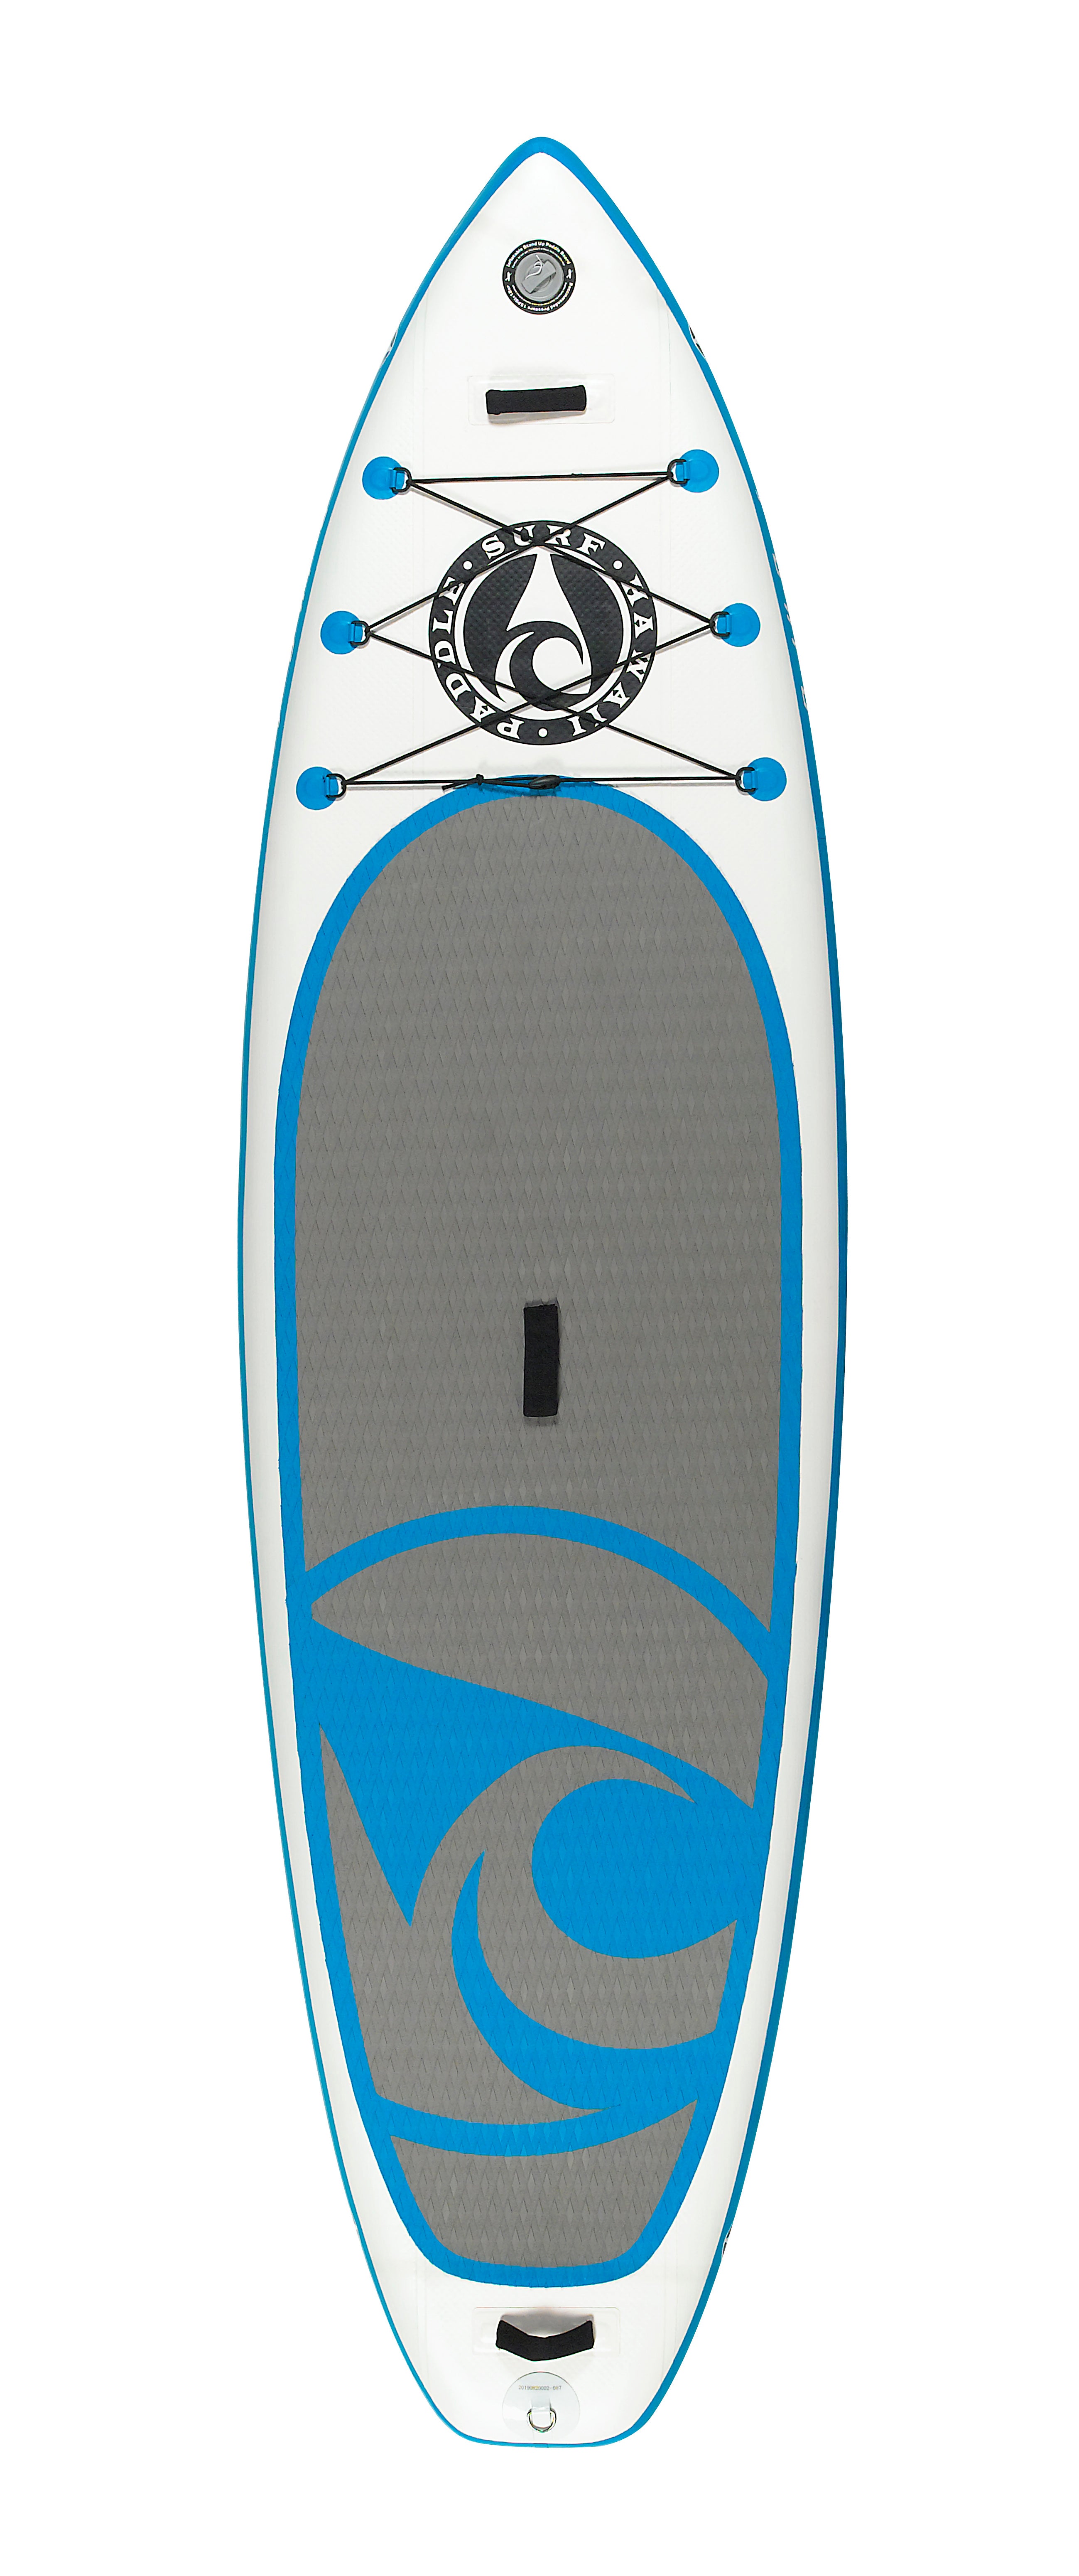 Picture shows the deck of the inSUP Paddler inflatable Stand up Paddle Board